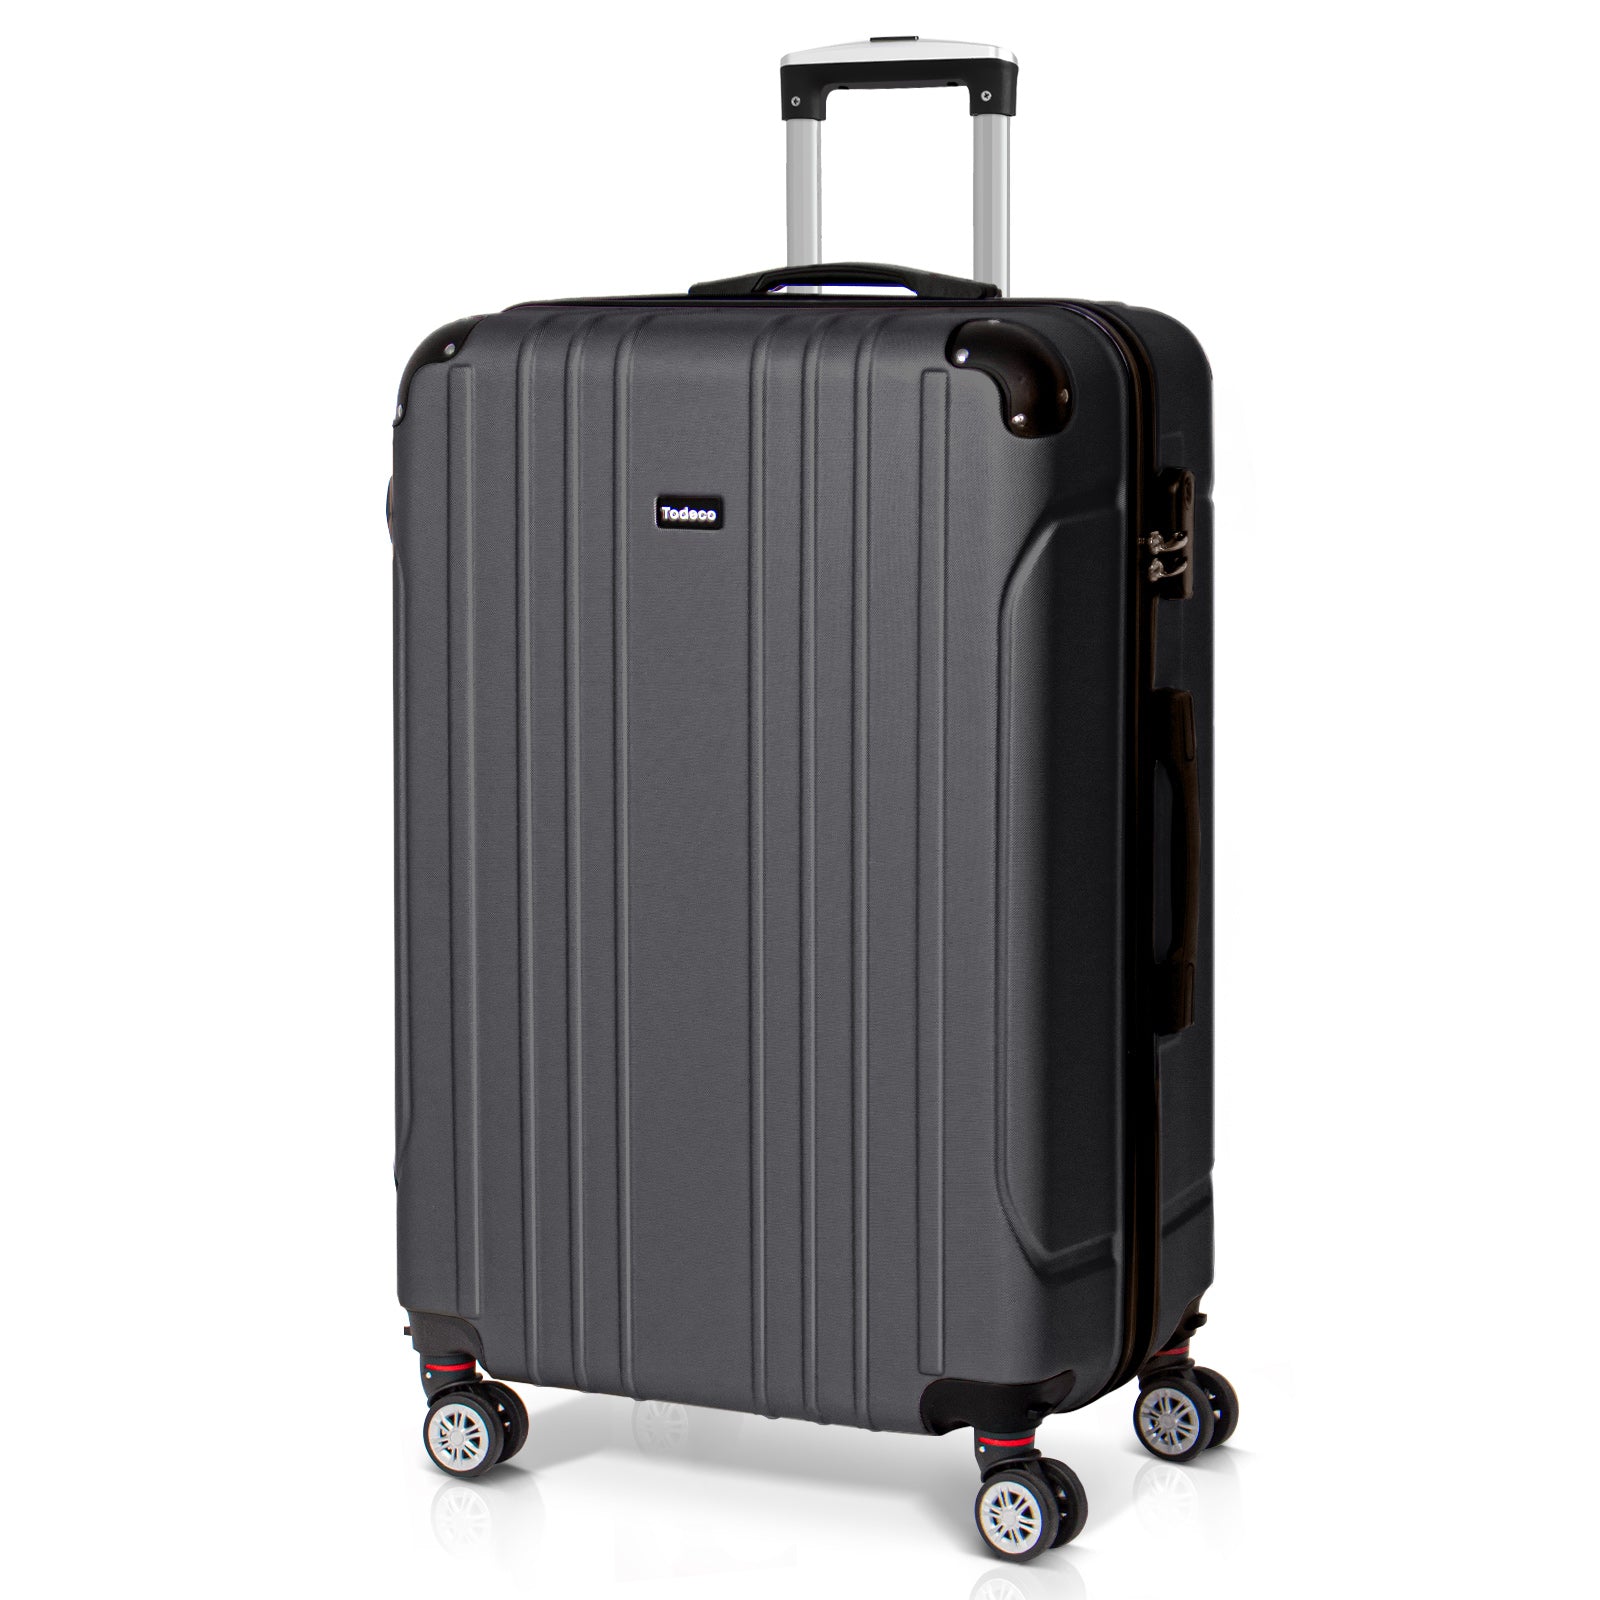 Todeco-Large-Suitcase-78cm-Travel-Suitcase-Rigid-and-Lightweight-ABS-Travel-Suitcase-with-Wheels-Suitcases-4-Double-Wheels-78x51x28cm-Anthracite-Gray-Large-Size-Suitcase-78cm-Anthracite-Gray